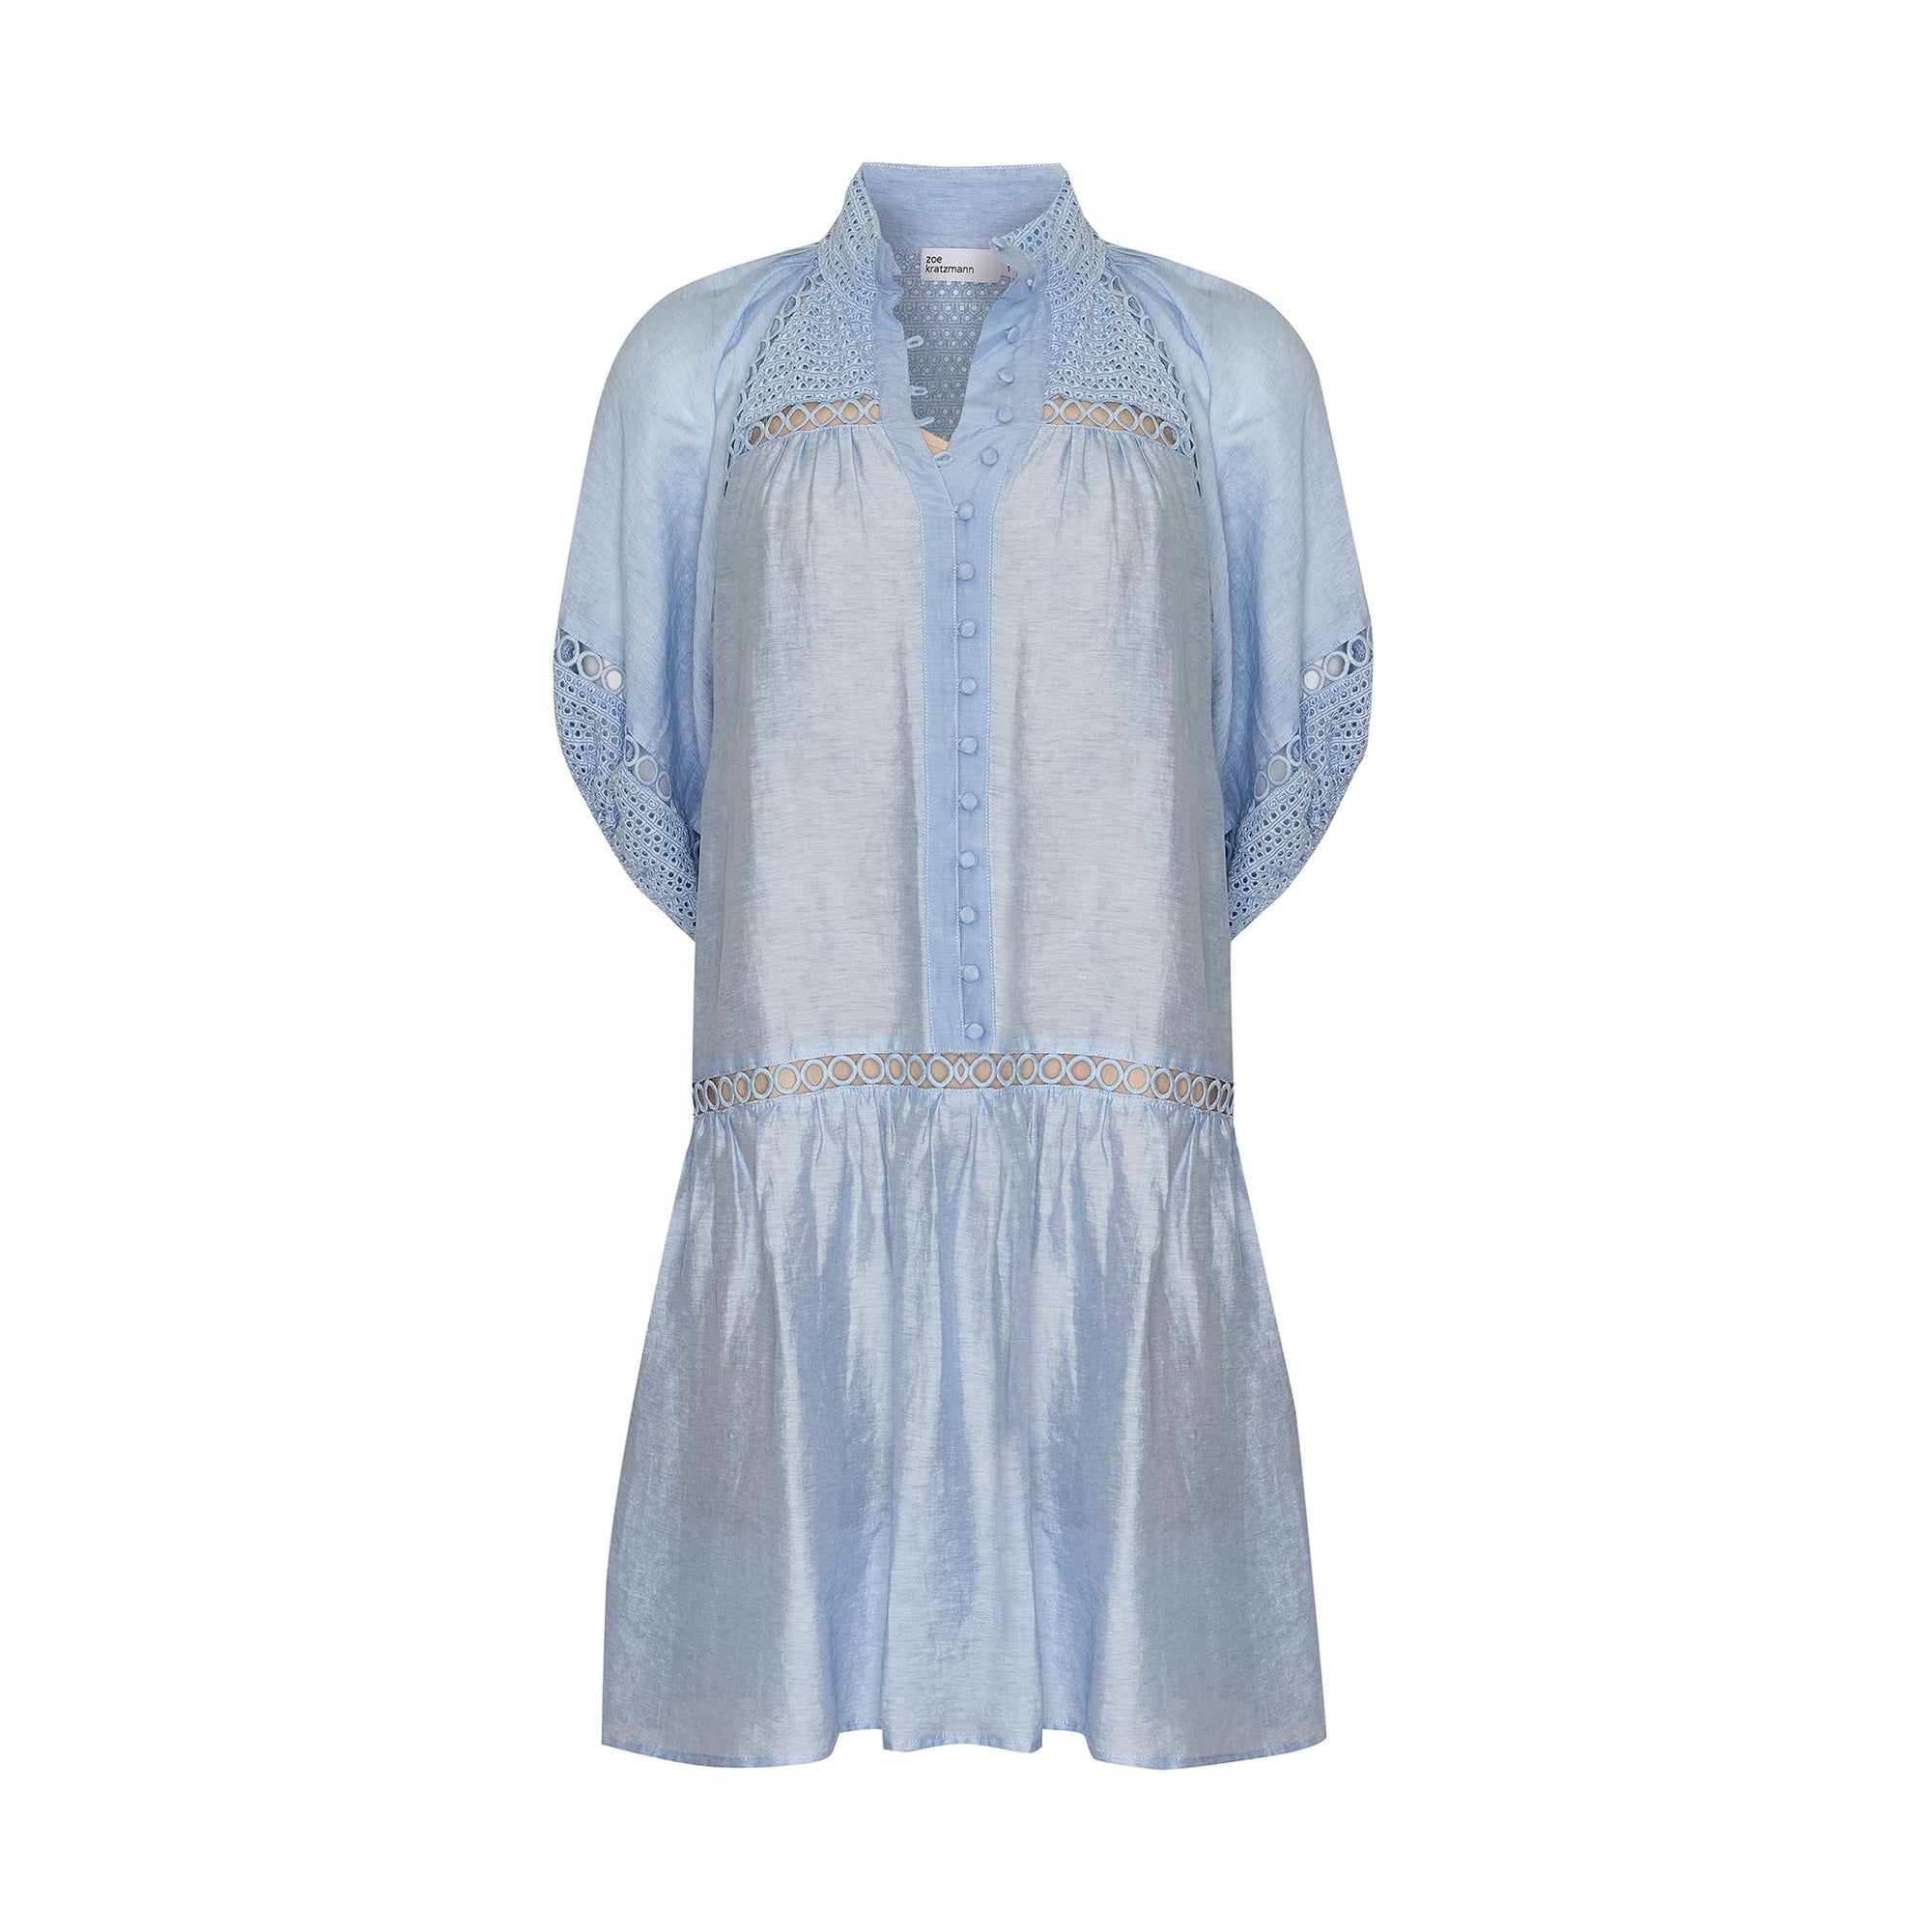 blue, high neck, covered buttons, circular lace detailing, drop waist, mid-length sleeve, mini dress, product image